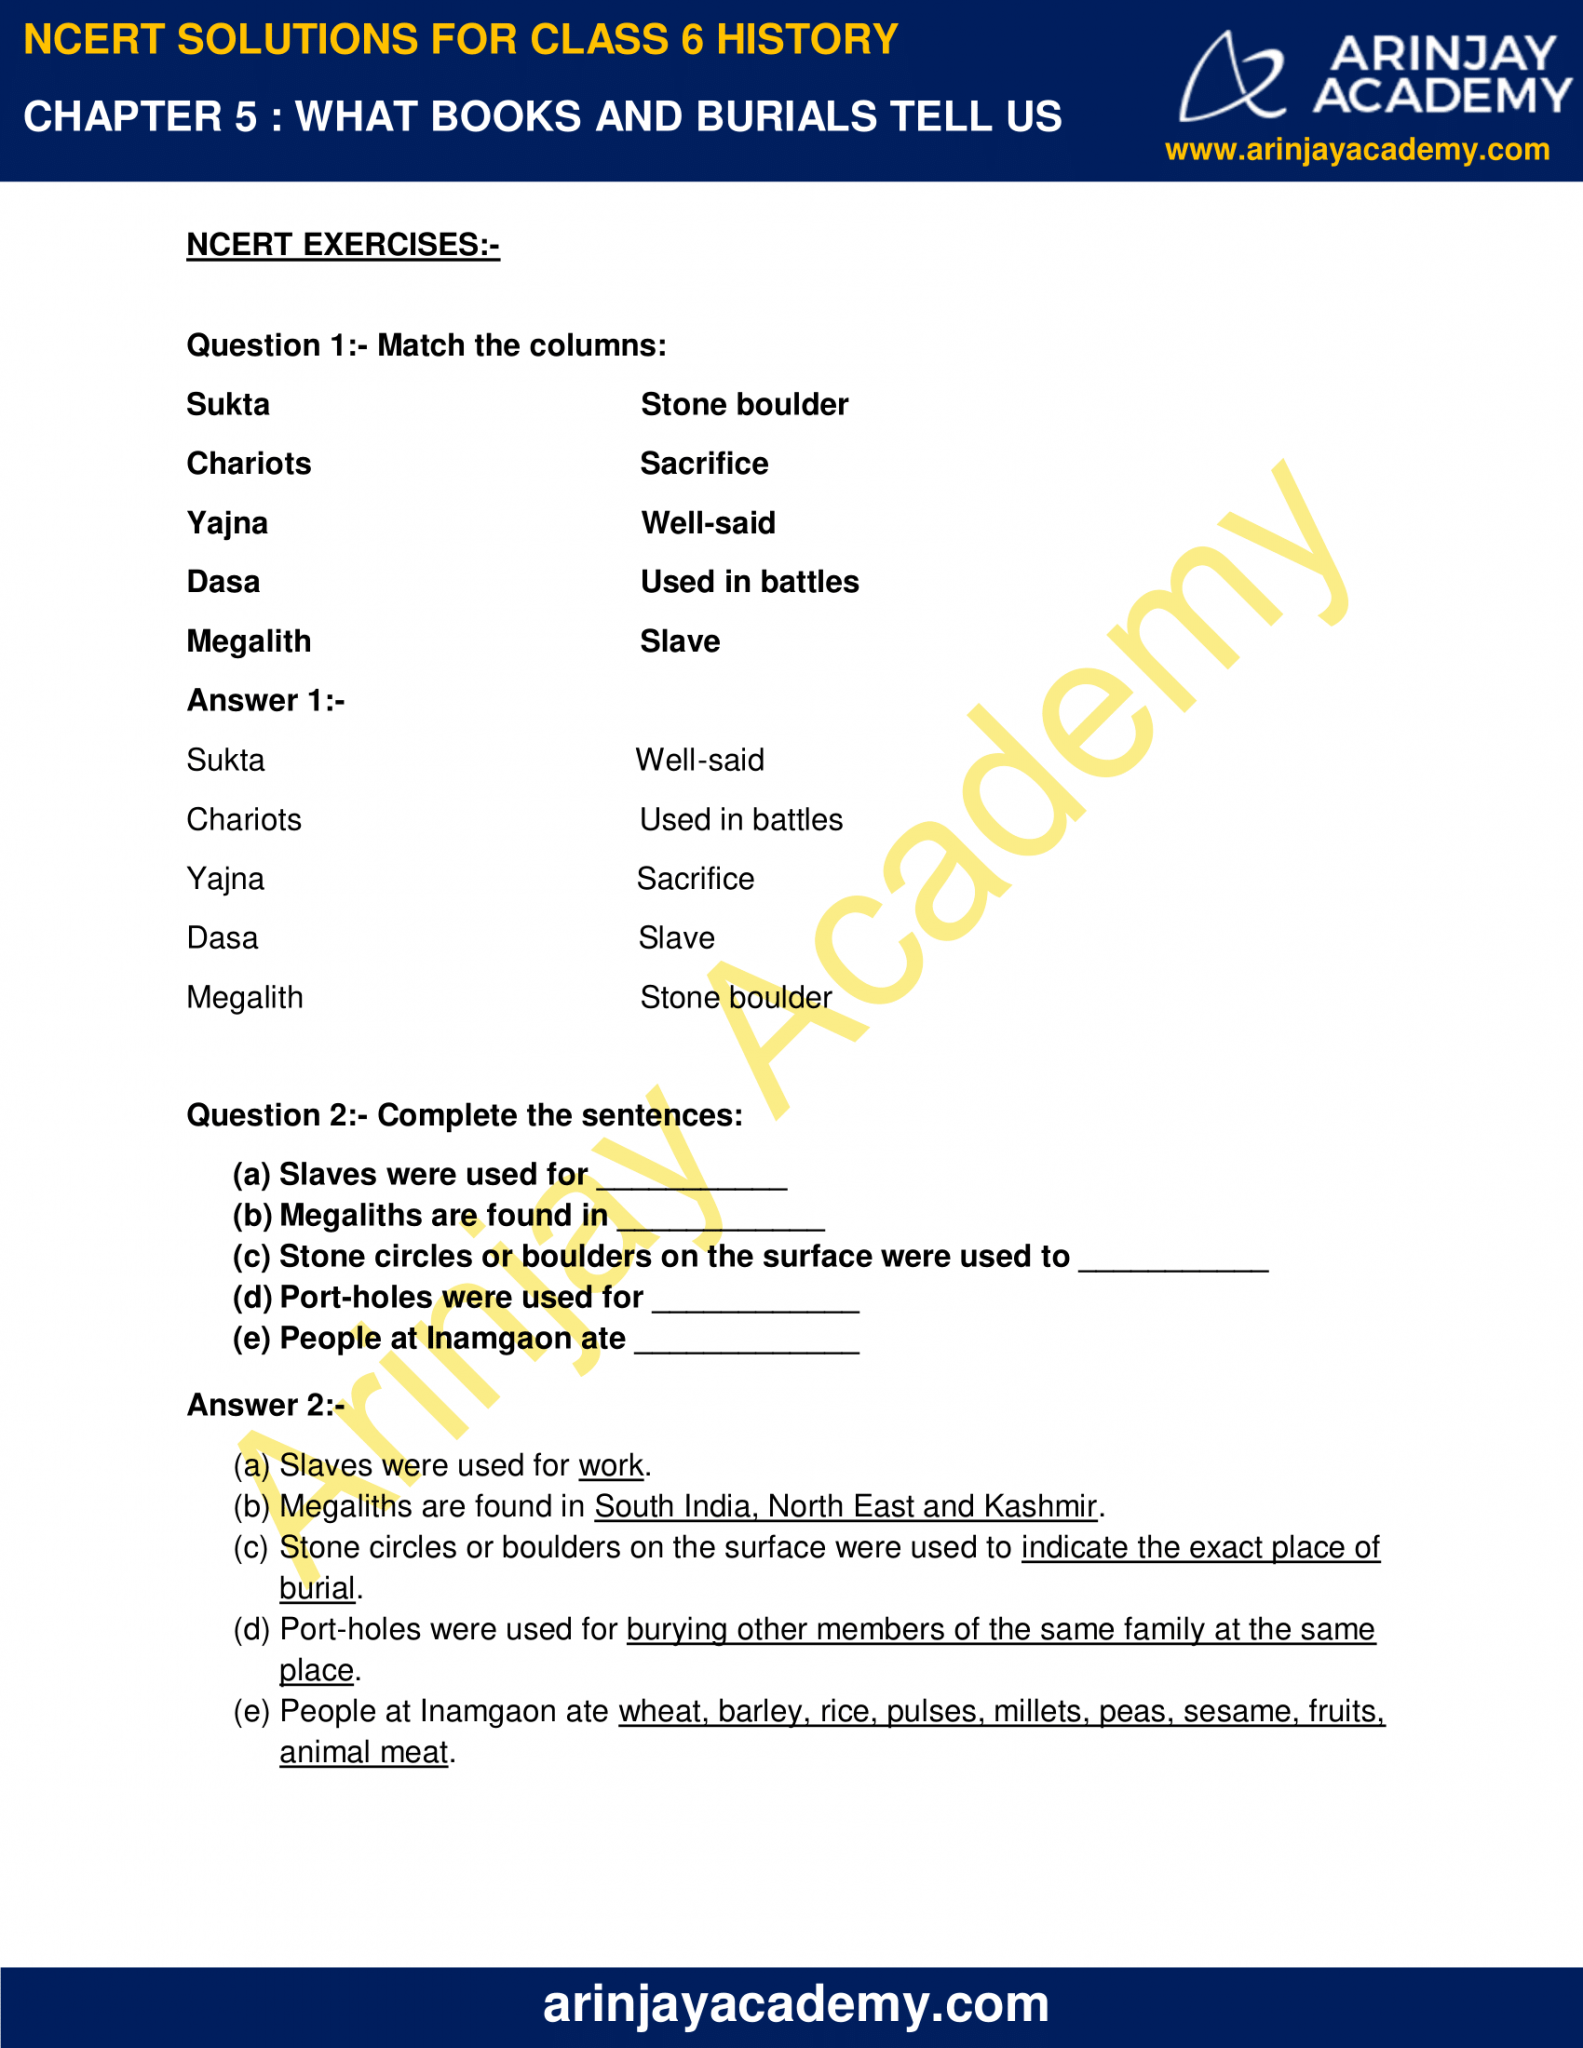 NCERT Solutions for Class 6 History Chapter 5 - NCERT Solutions For Class 6 History Chapter 5 1 1583x2048